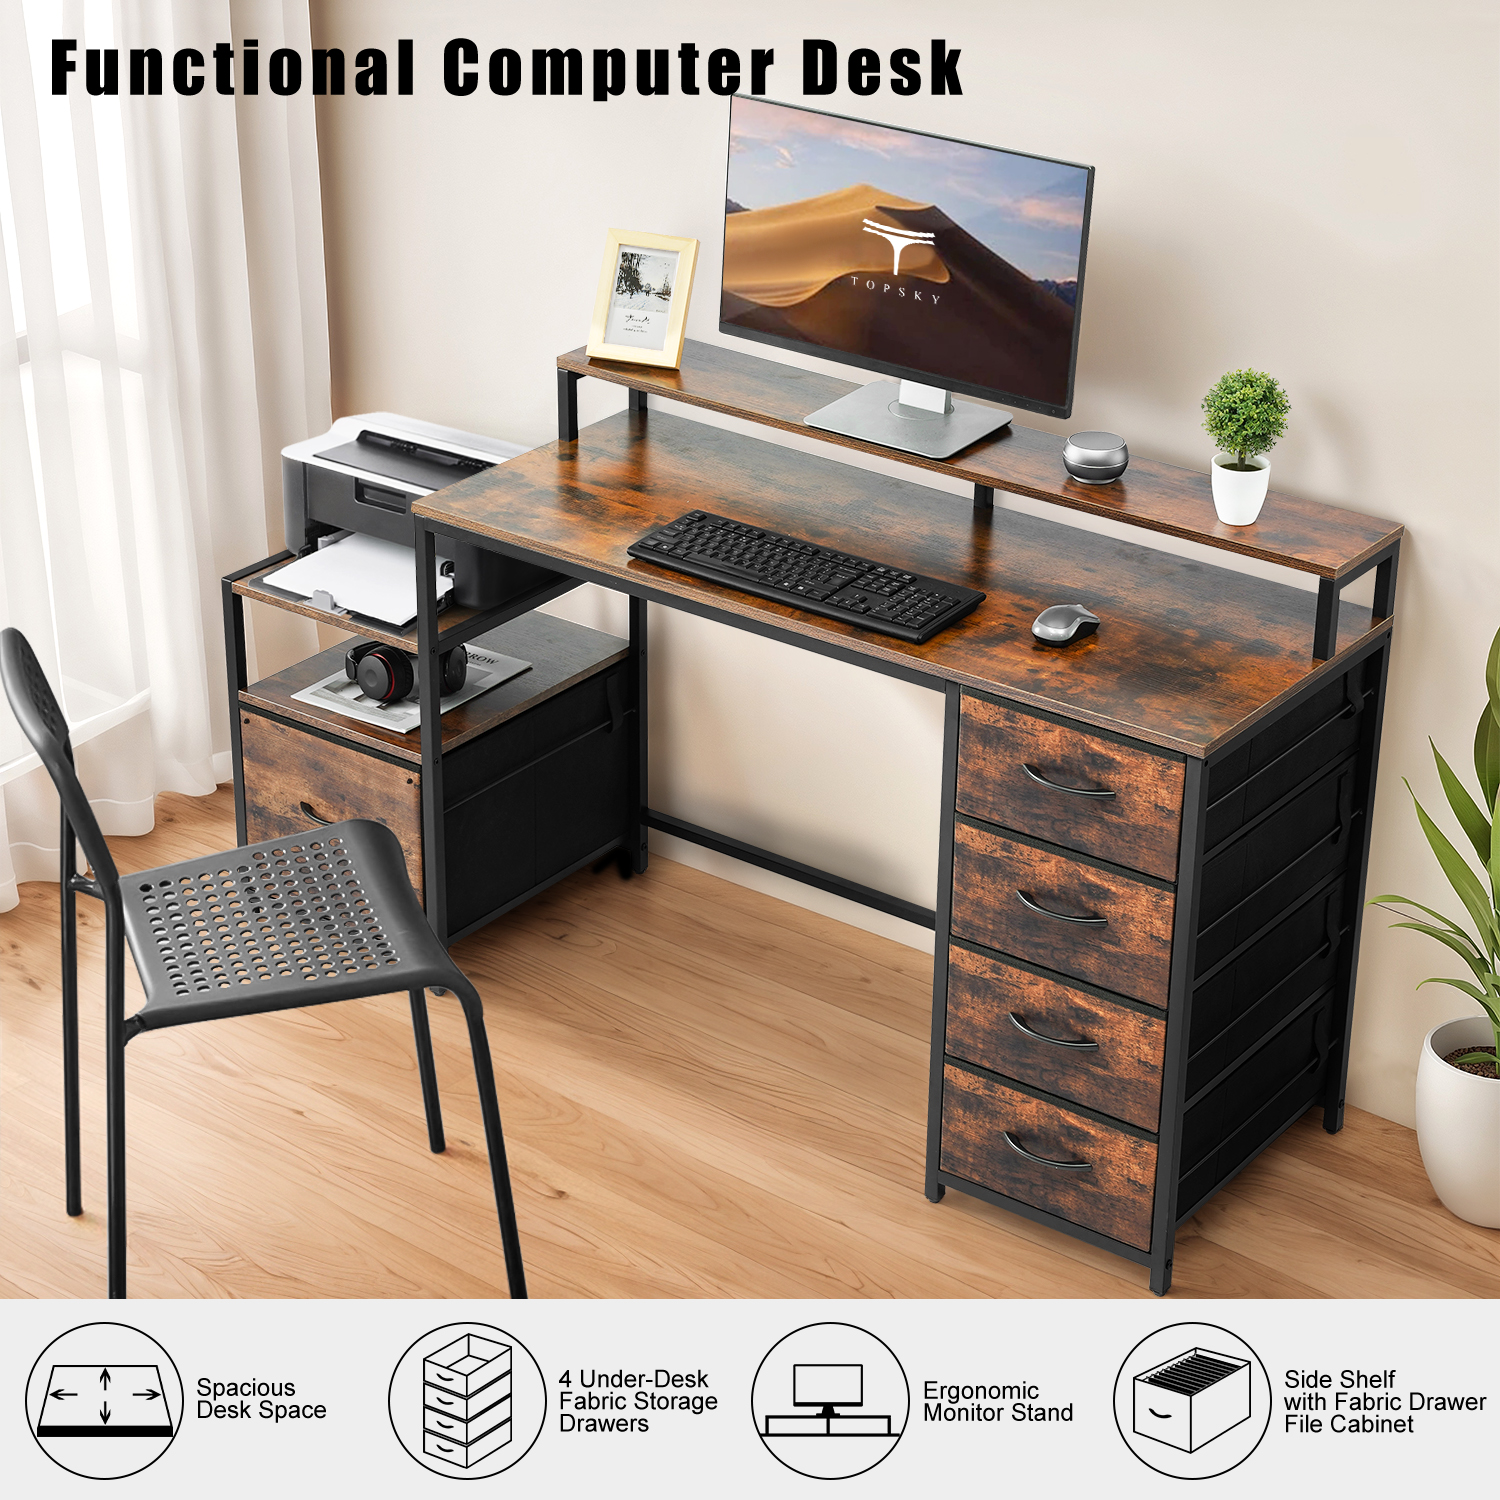 TOPSKY Compact Computer Desk with Storage Shelf/Cloth File Drawer for Letter Size/Monitor Stand Study Table for Home Office CT-8026